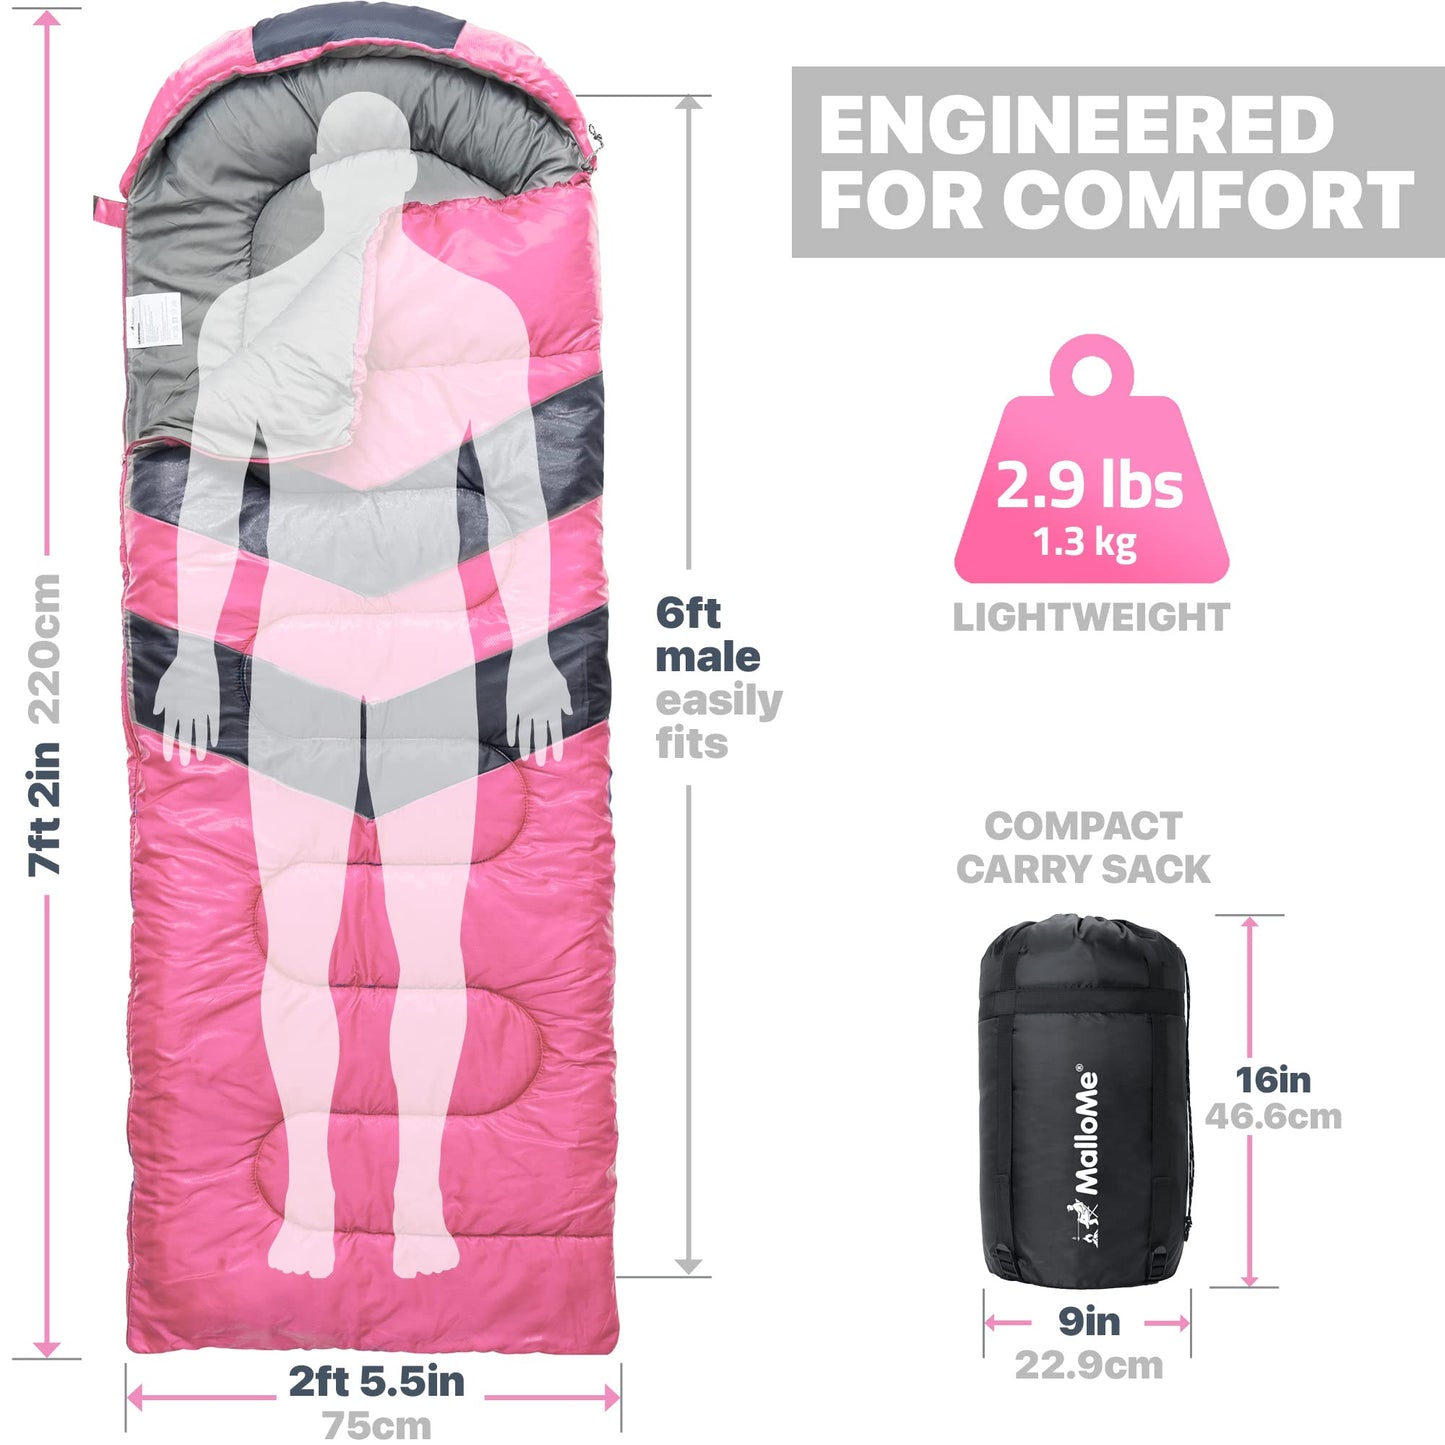 MalloMe Sleeping Bags for Adults Cold Weather & Warm - Backpacking Camping Sleeping Bag for Kids 10-12, Girls, Boys - Lightweight Compact Camping Essentials Gear Accessories Hiking Sleep Must Haves